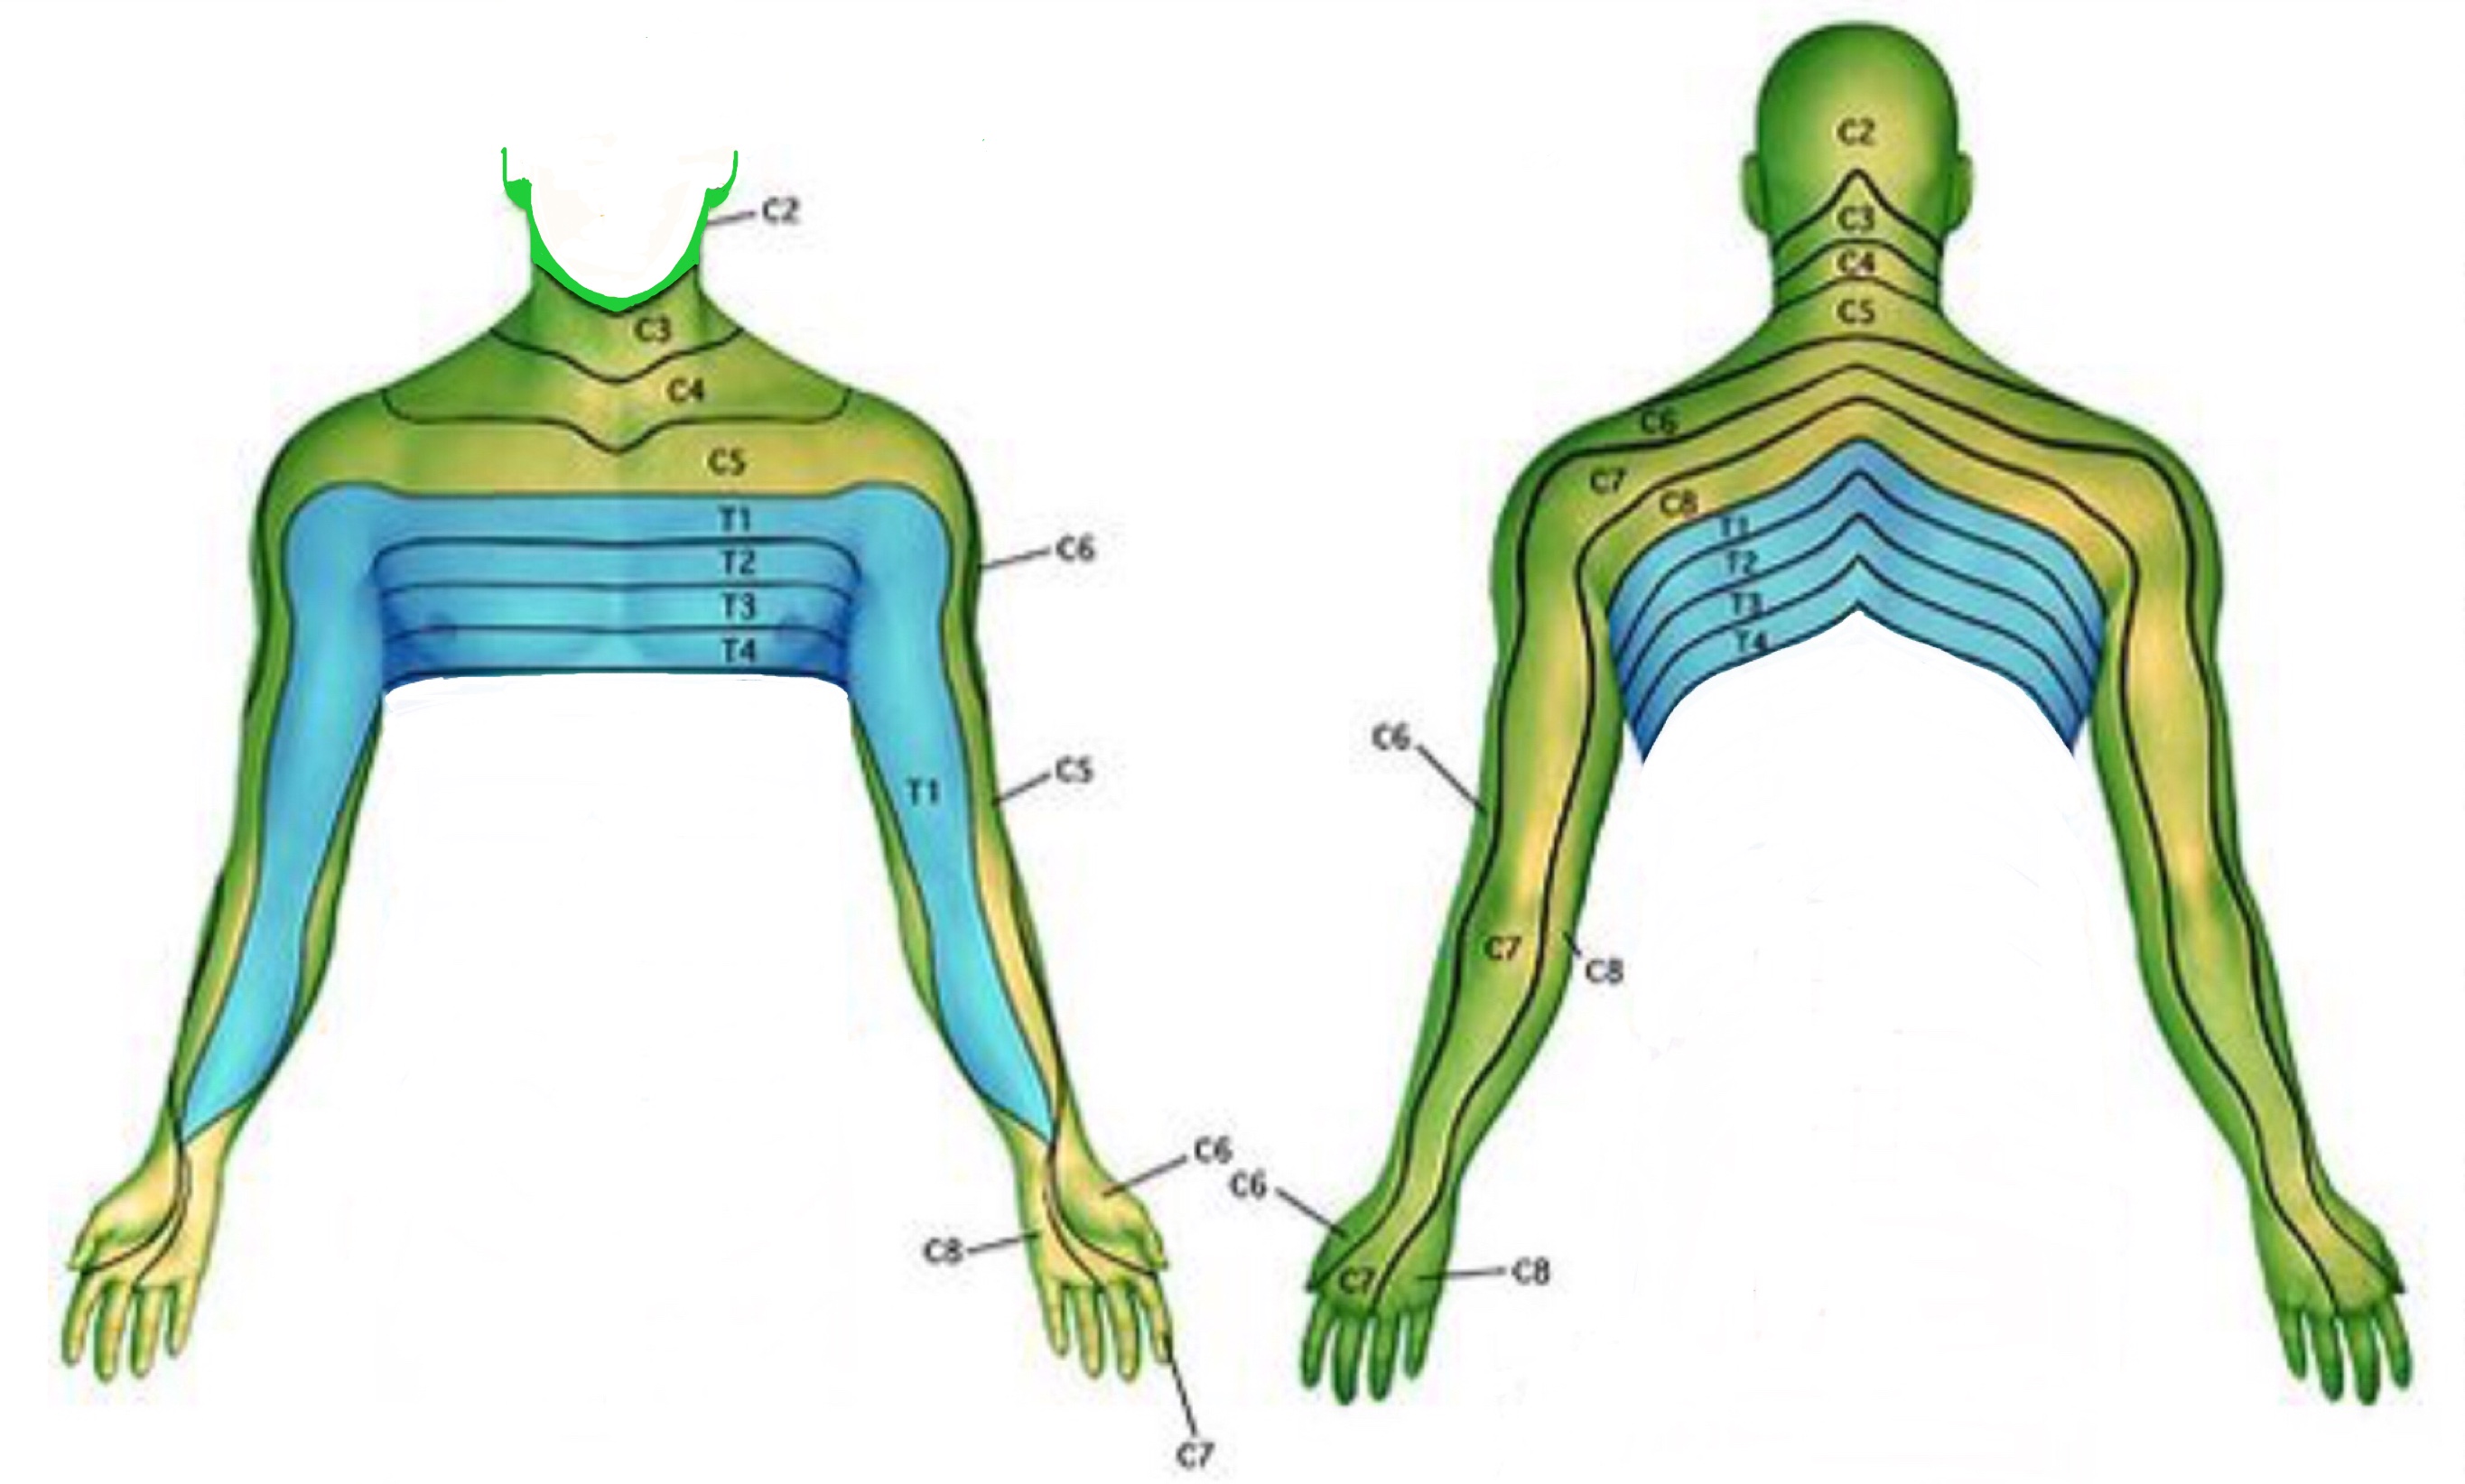 The Dermatome chart shows how the the different nerves map out the differen...